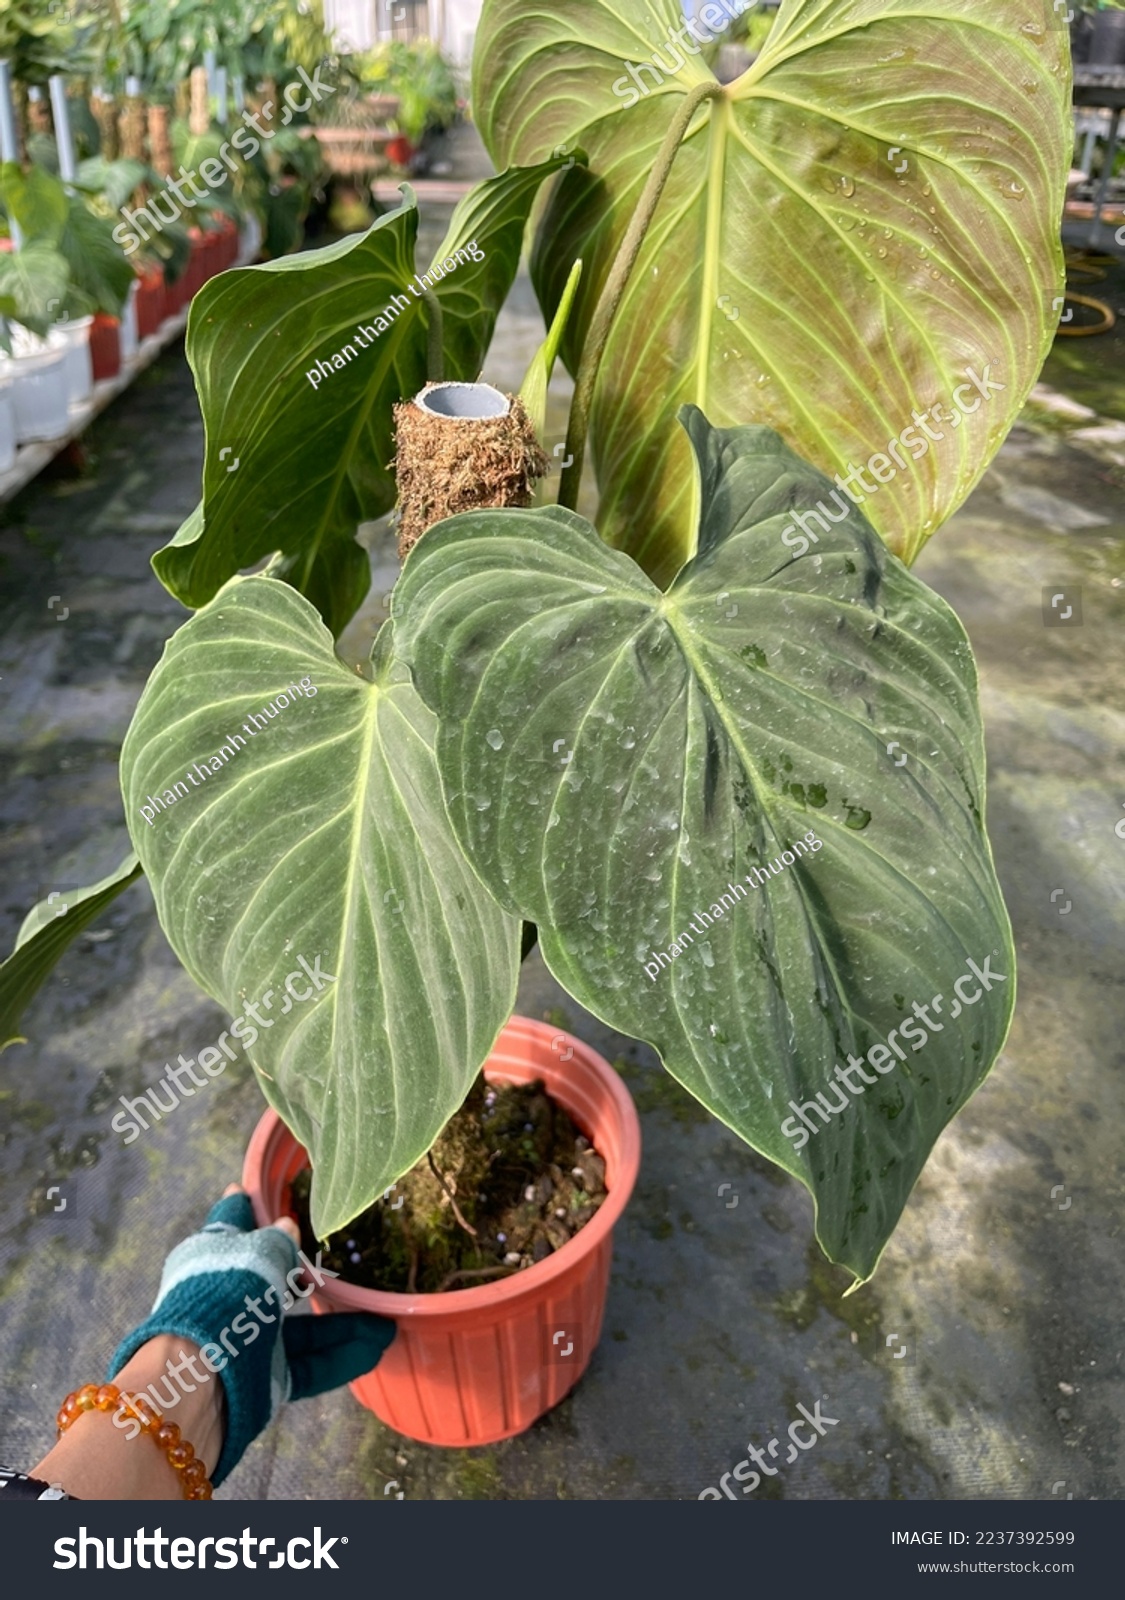 Philodendron Splendid, The philodendron splendid is considered a rare plant, Philodendrons originate in tropical locations where the temperatures are consistently warm #2237392599